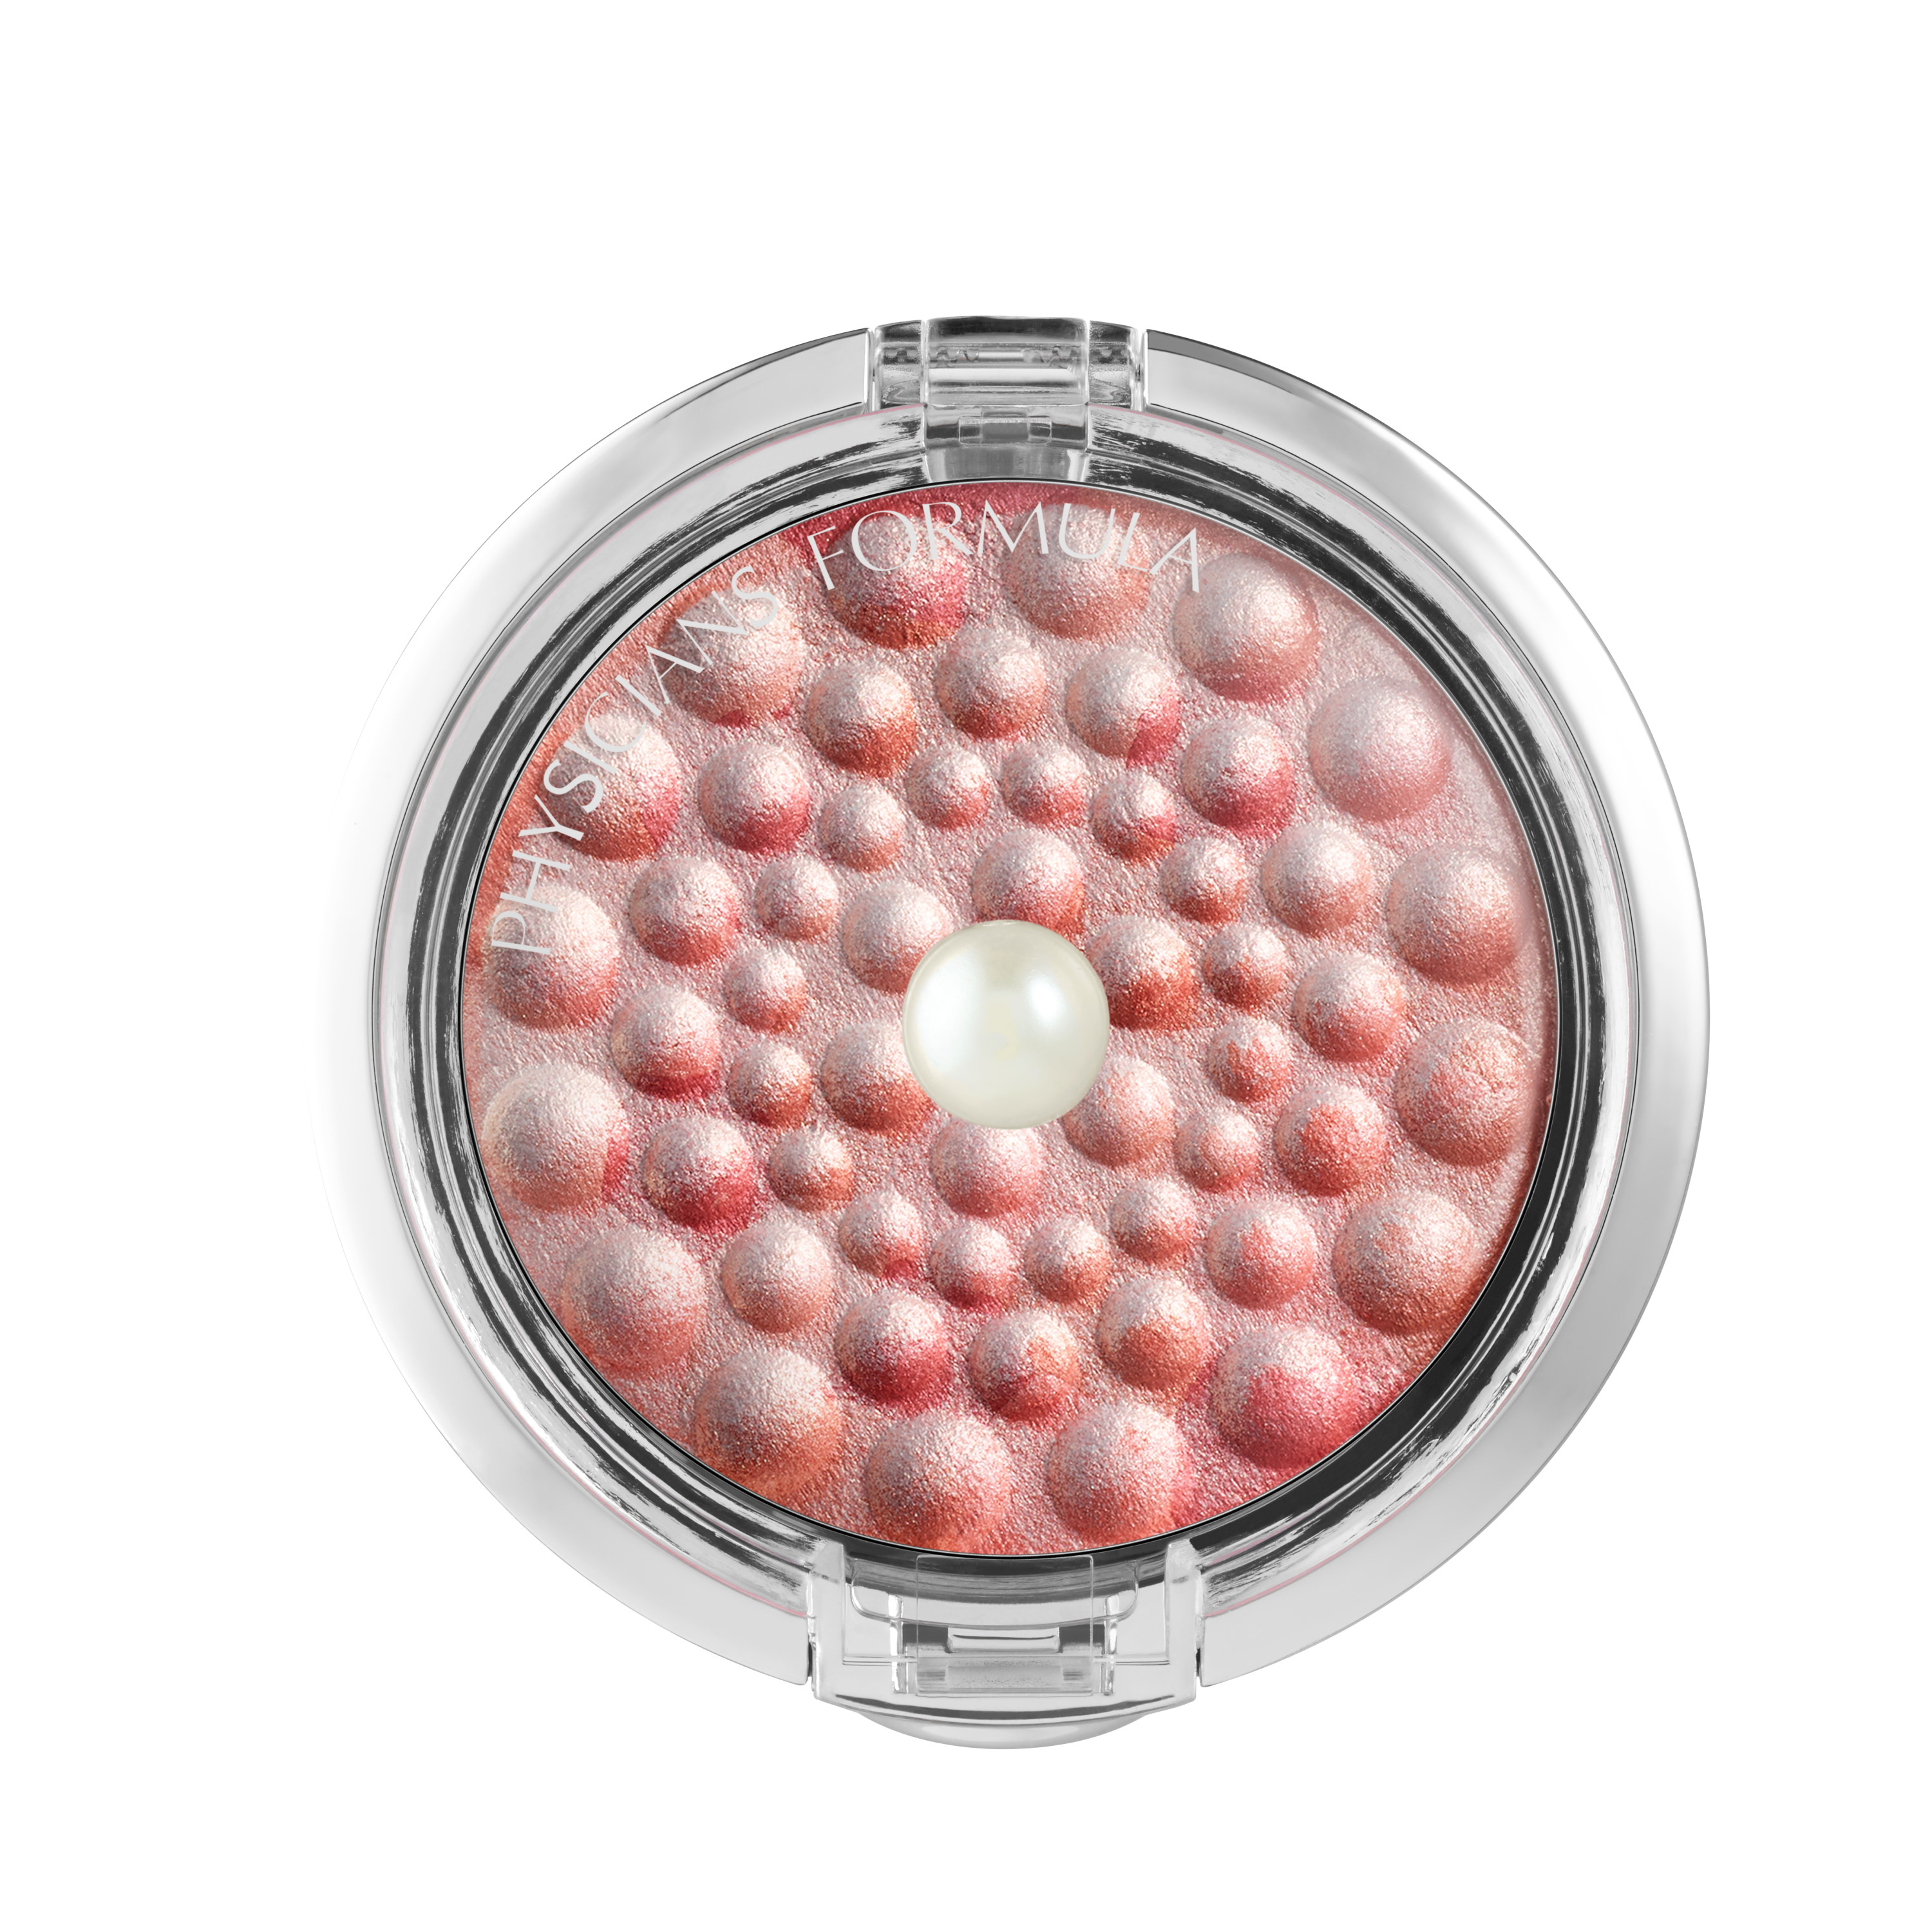 Physicians Formula Powder Palette® Mineral Glow Pearls Blush, Natural Pearl - image 2 of 6